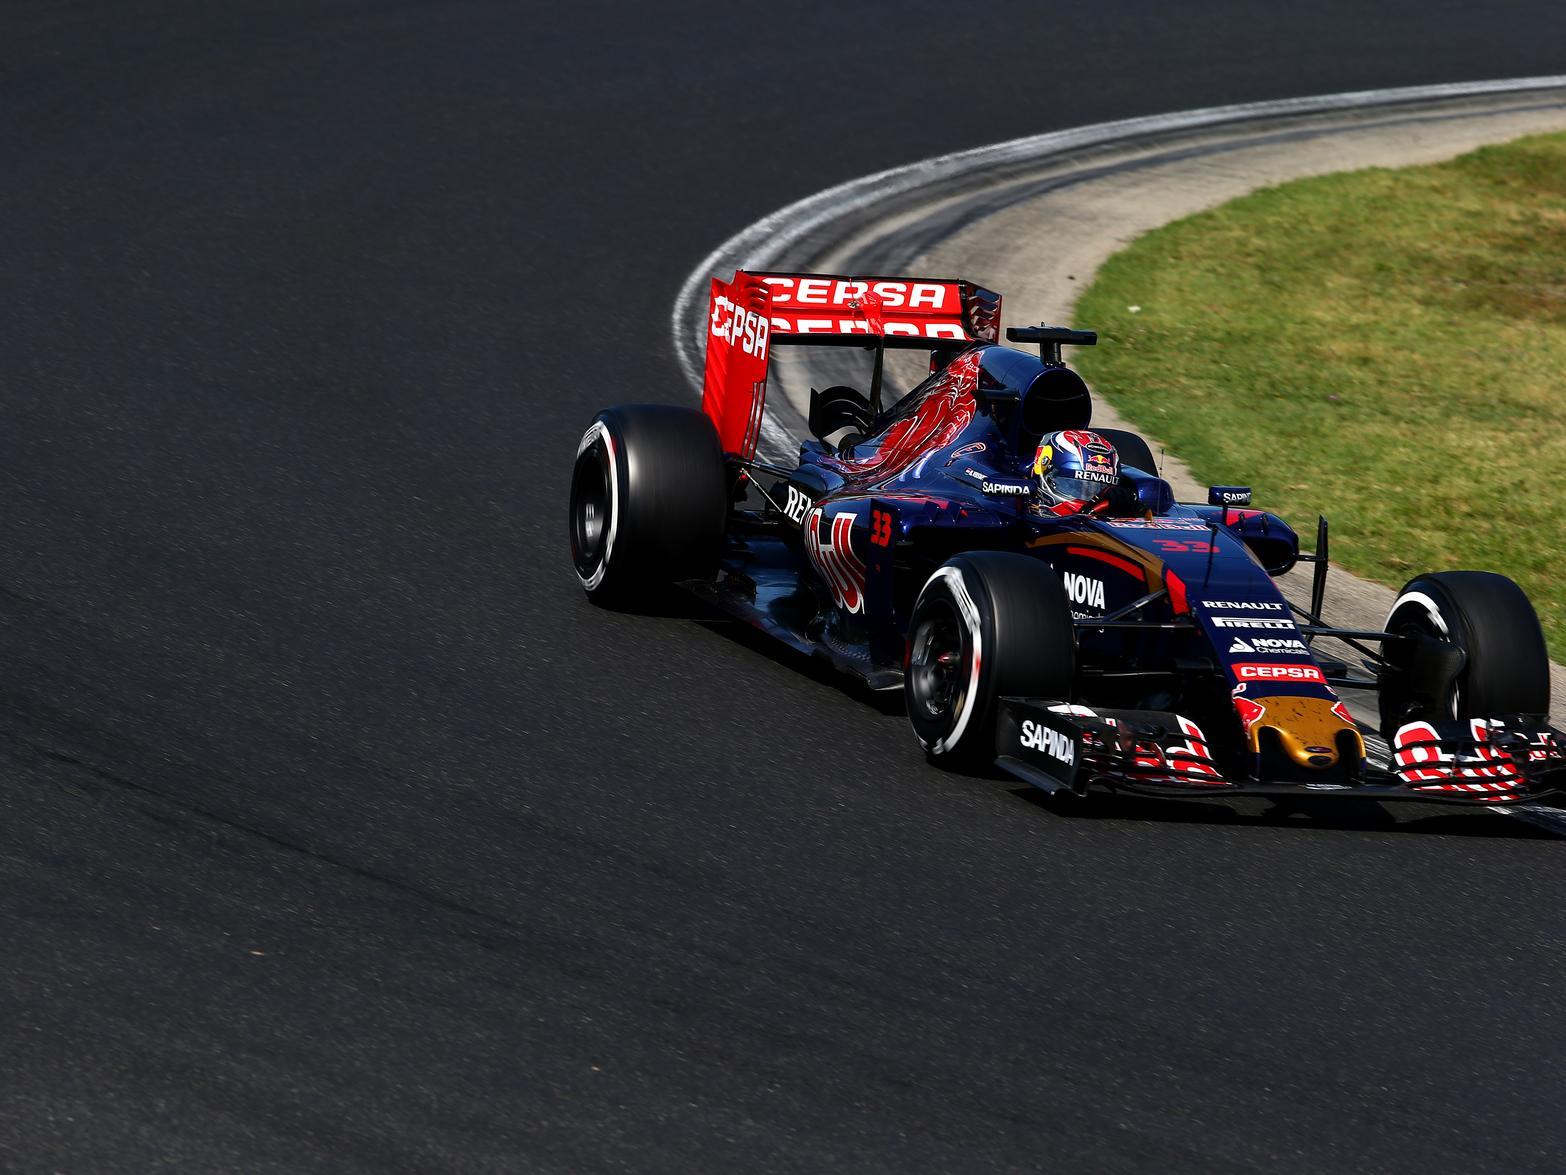 A brilliant drive from the Dutchman saw him claim his best finish of the year, taking fourth spot.